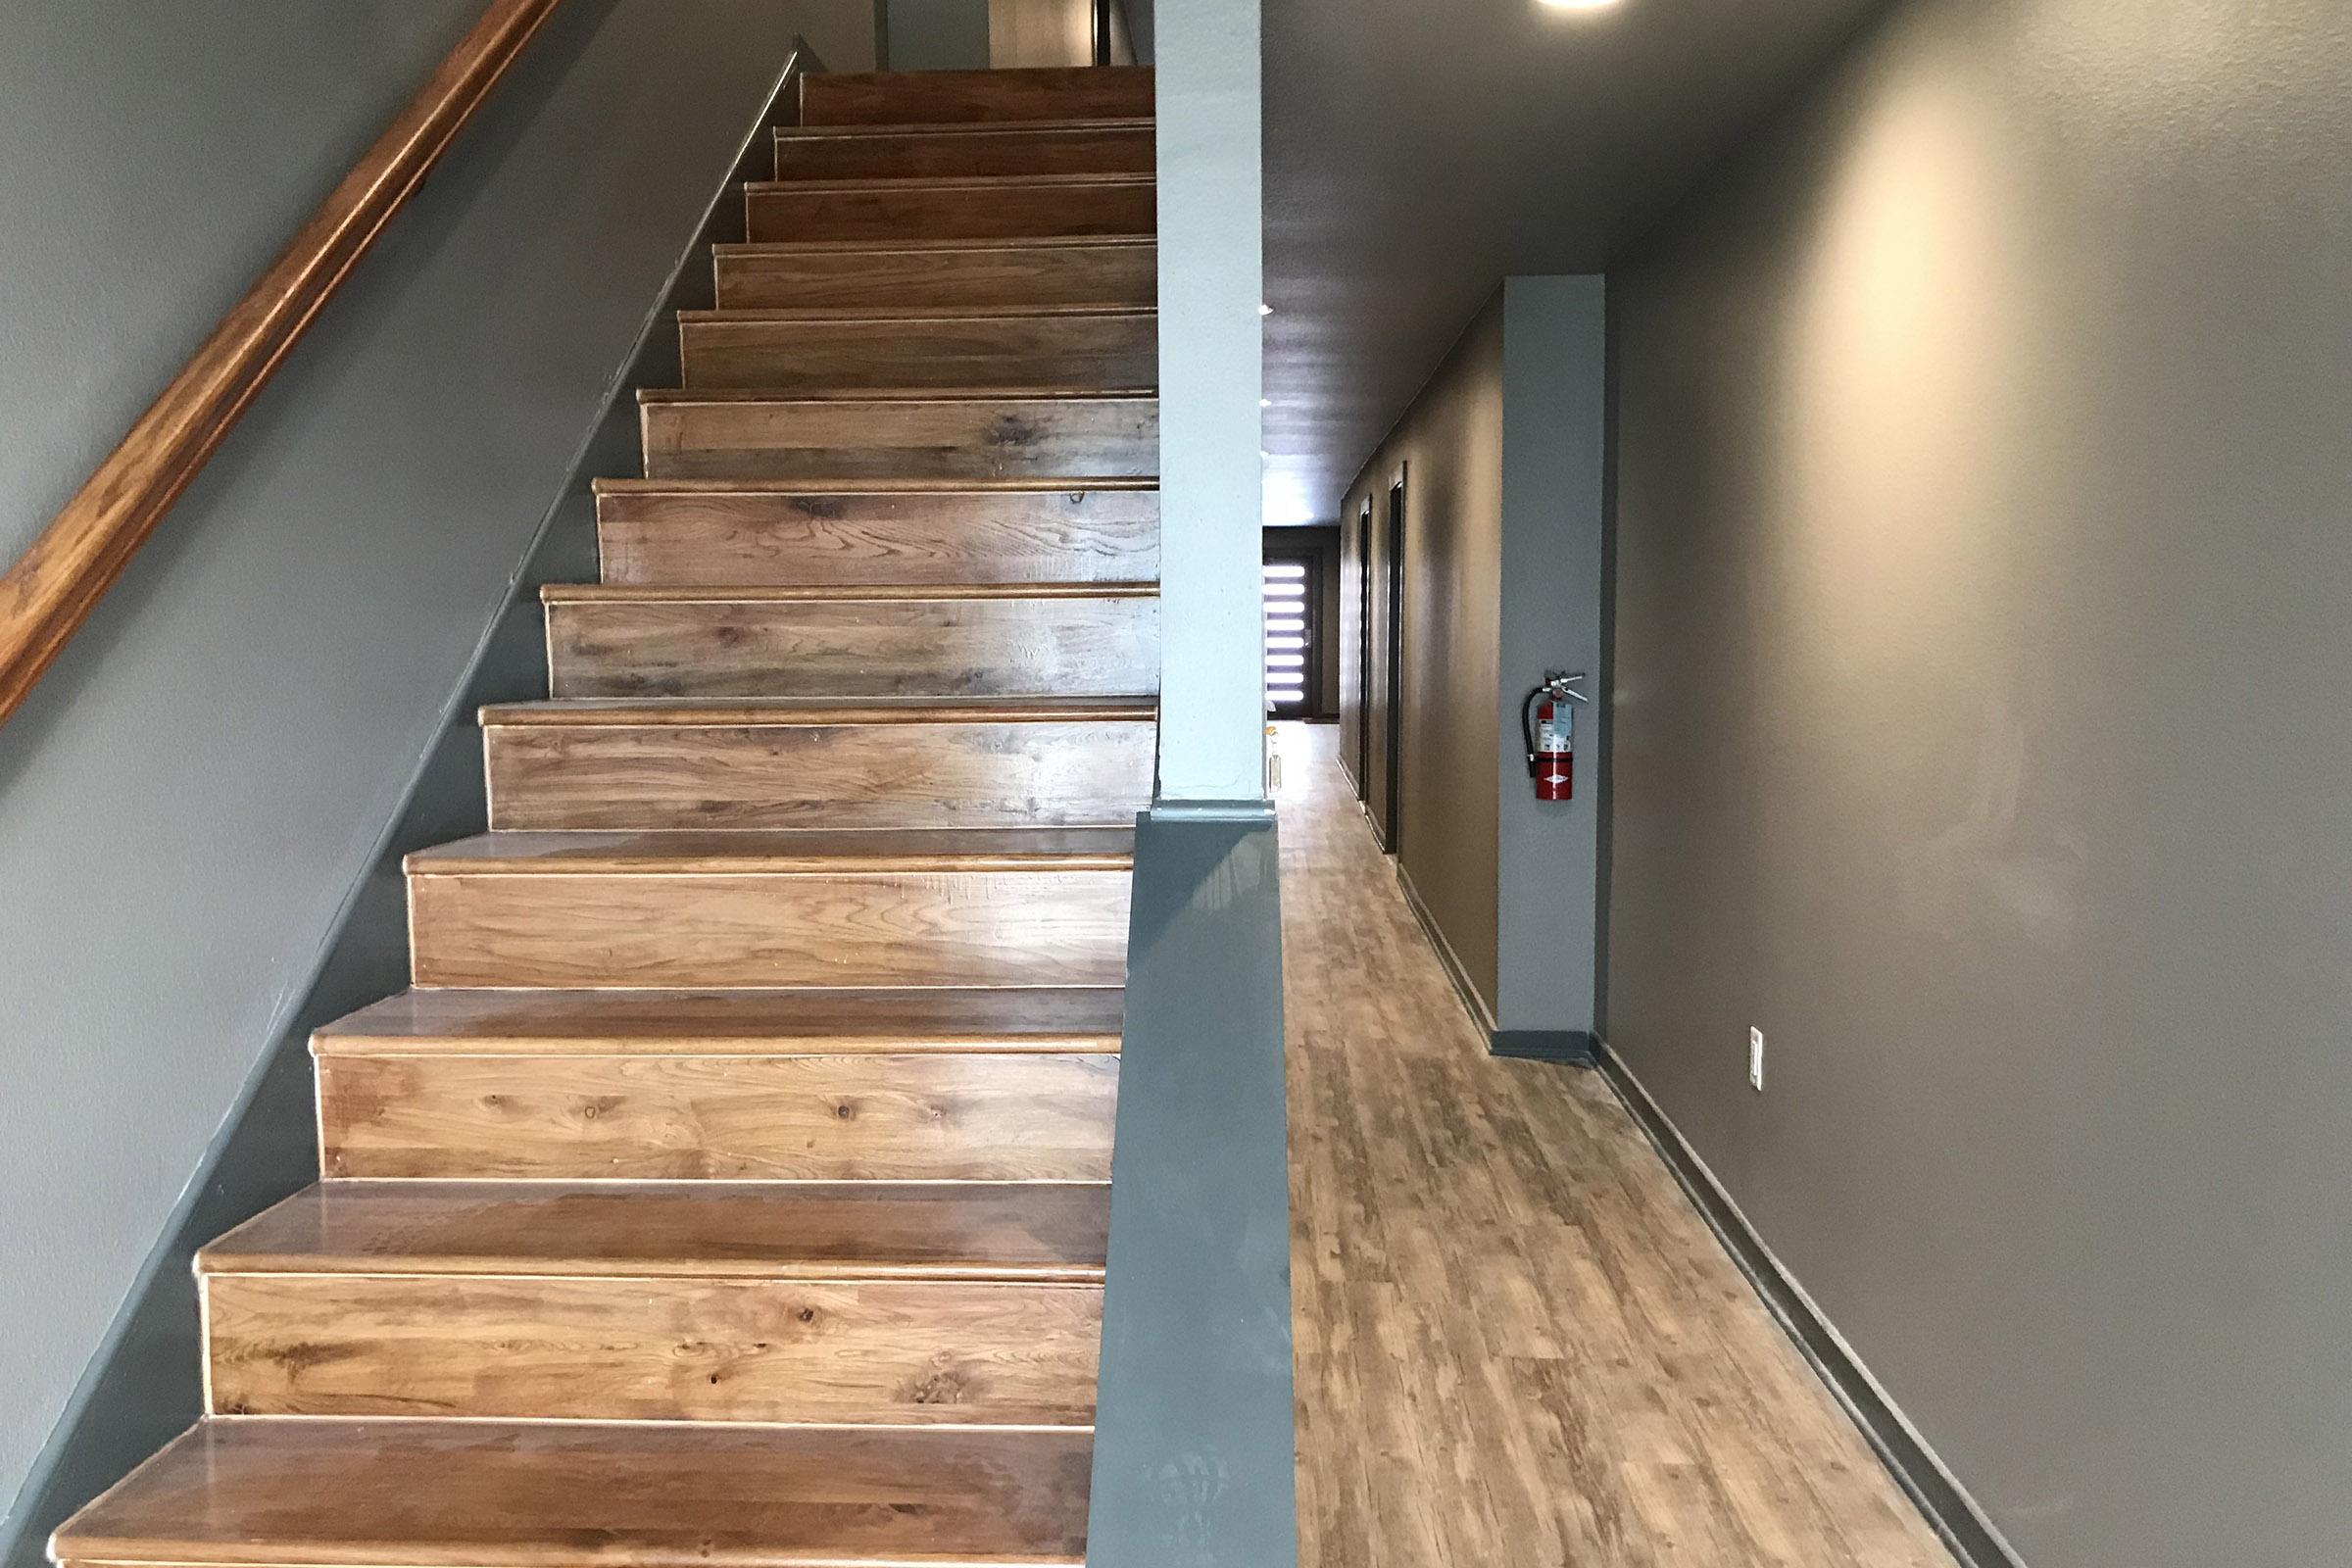 hallway and stairs with wooden floors